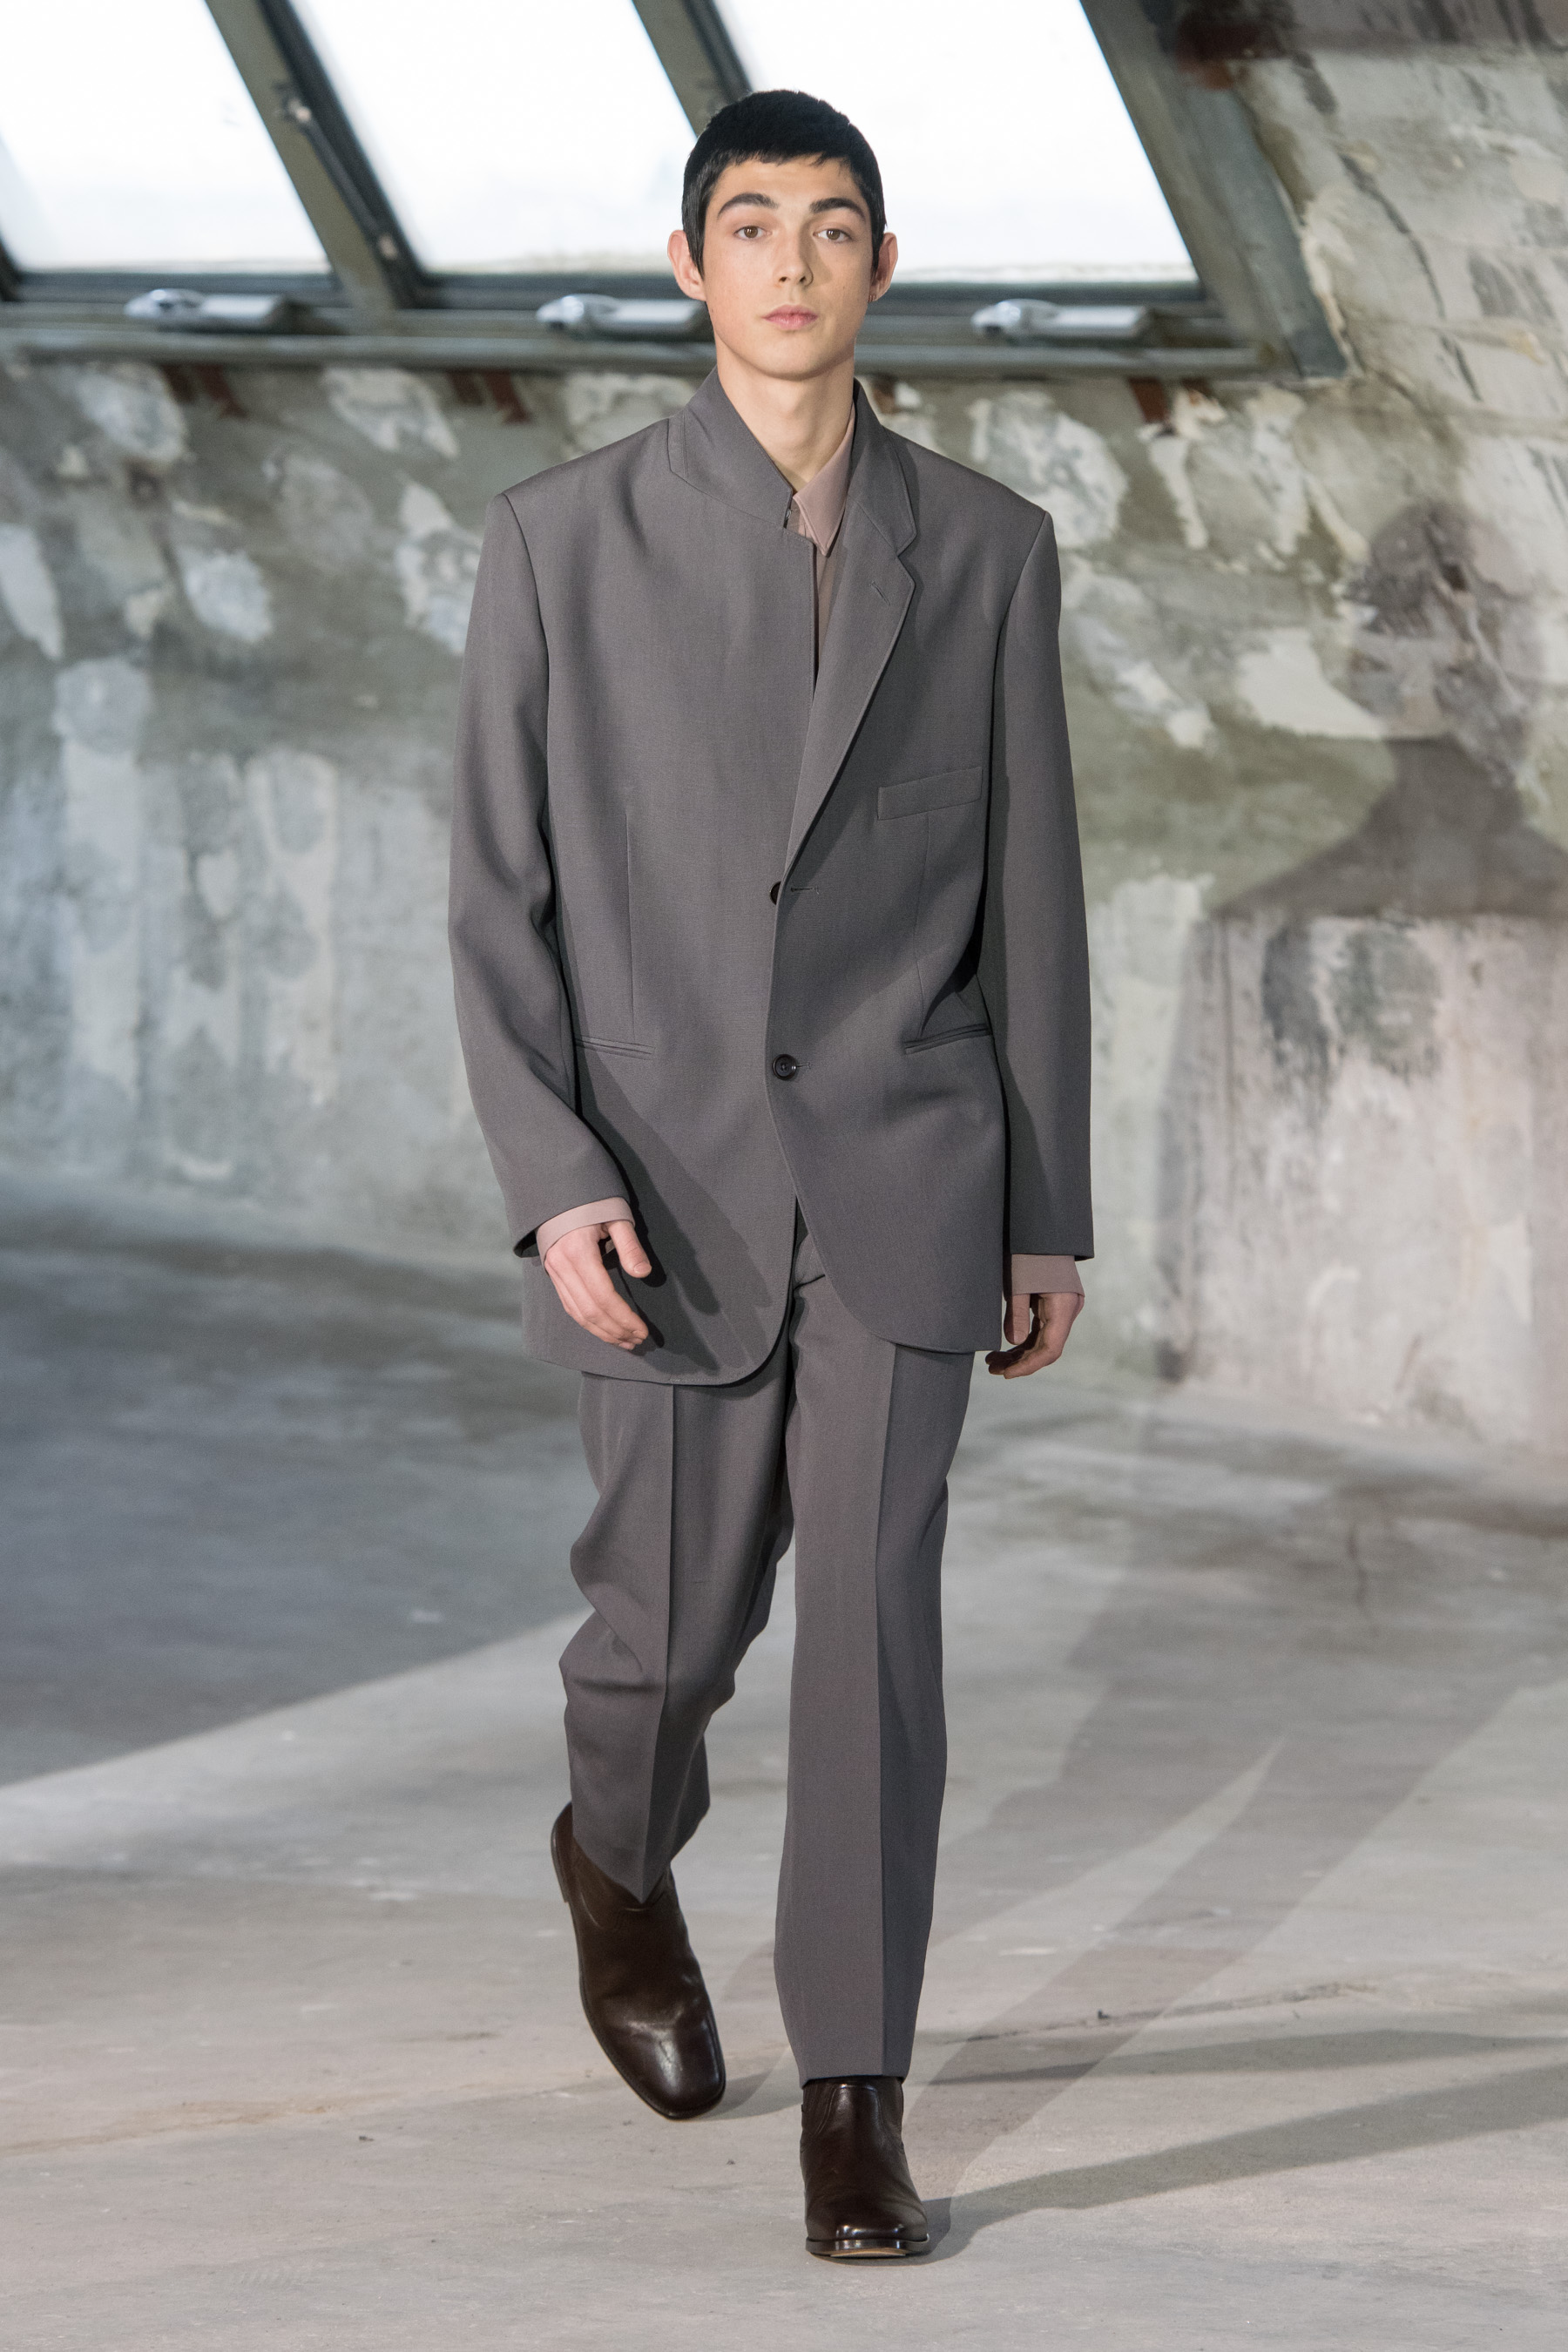 Lemaire Fall 2018 Men’s Fashion Show - The Impression